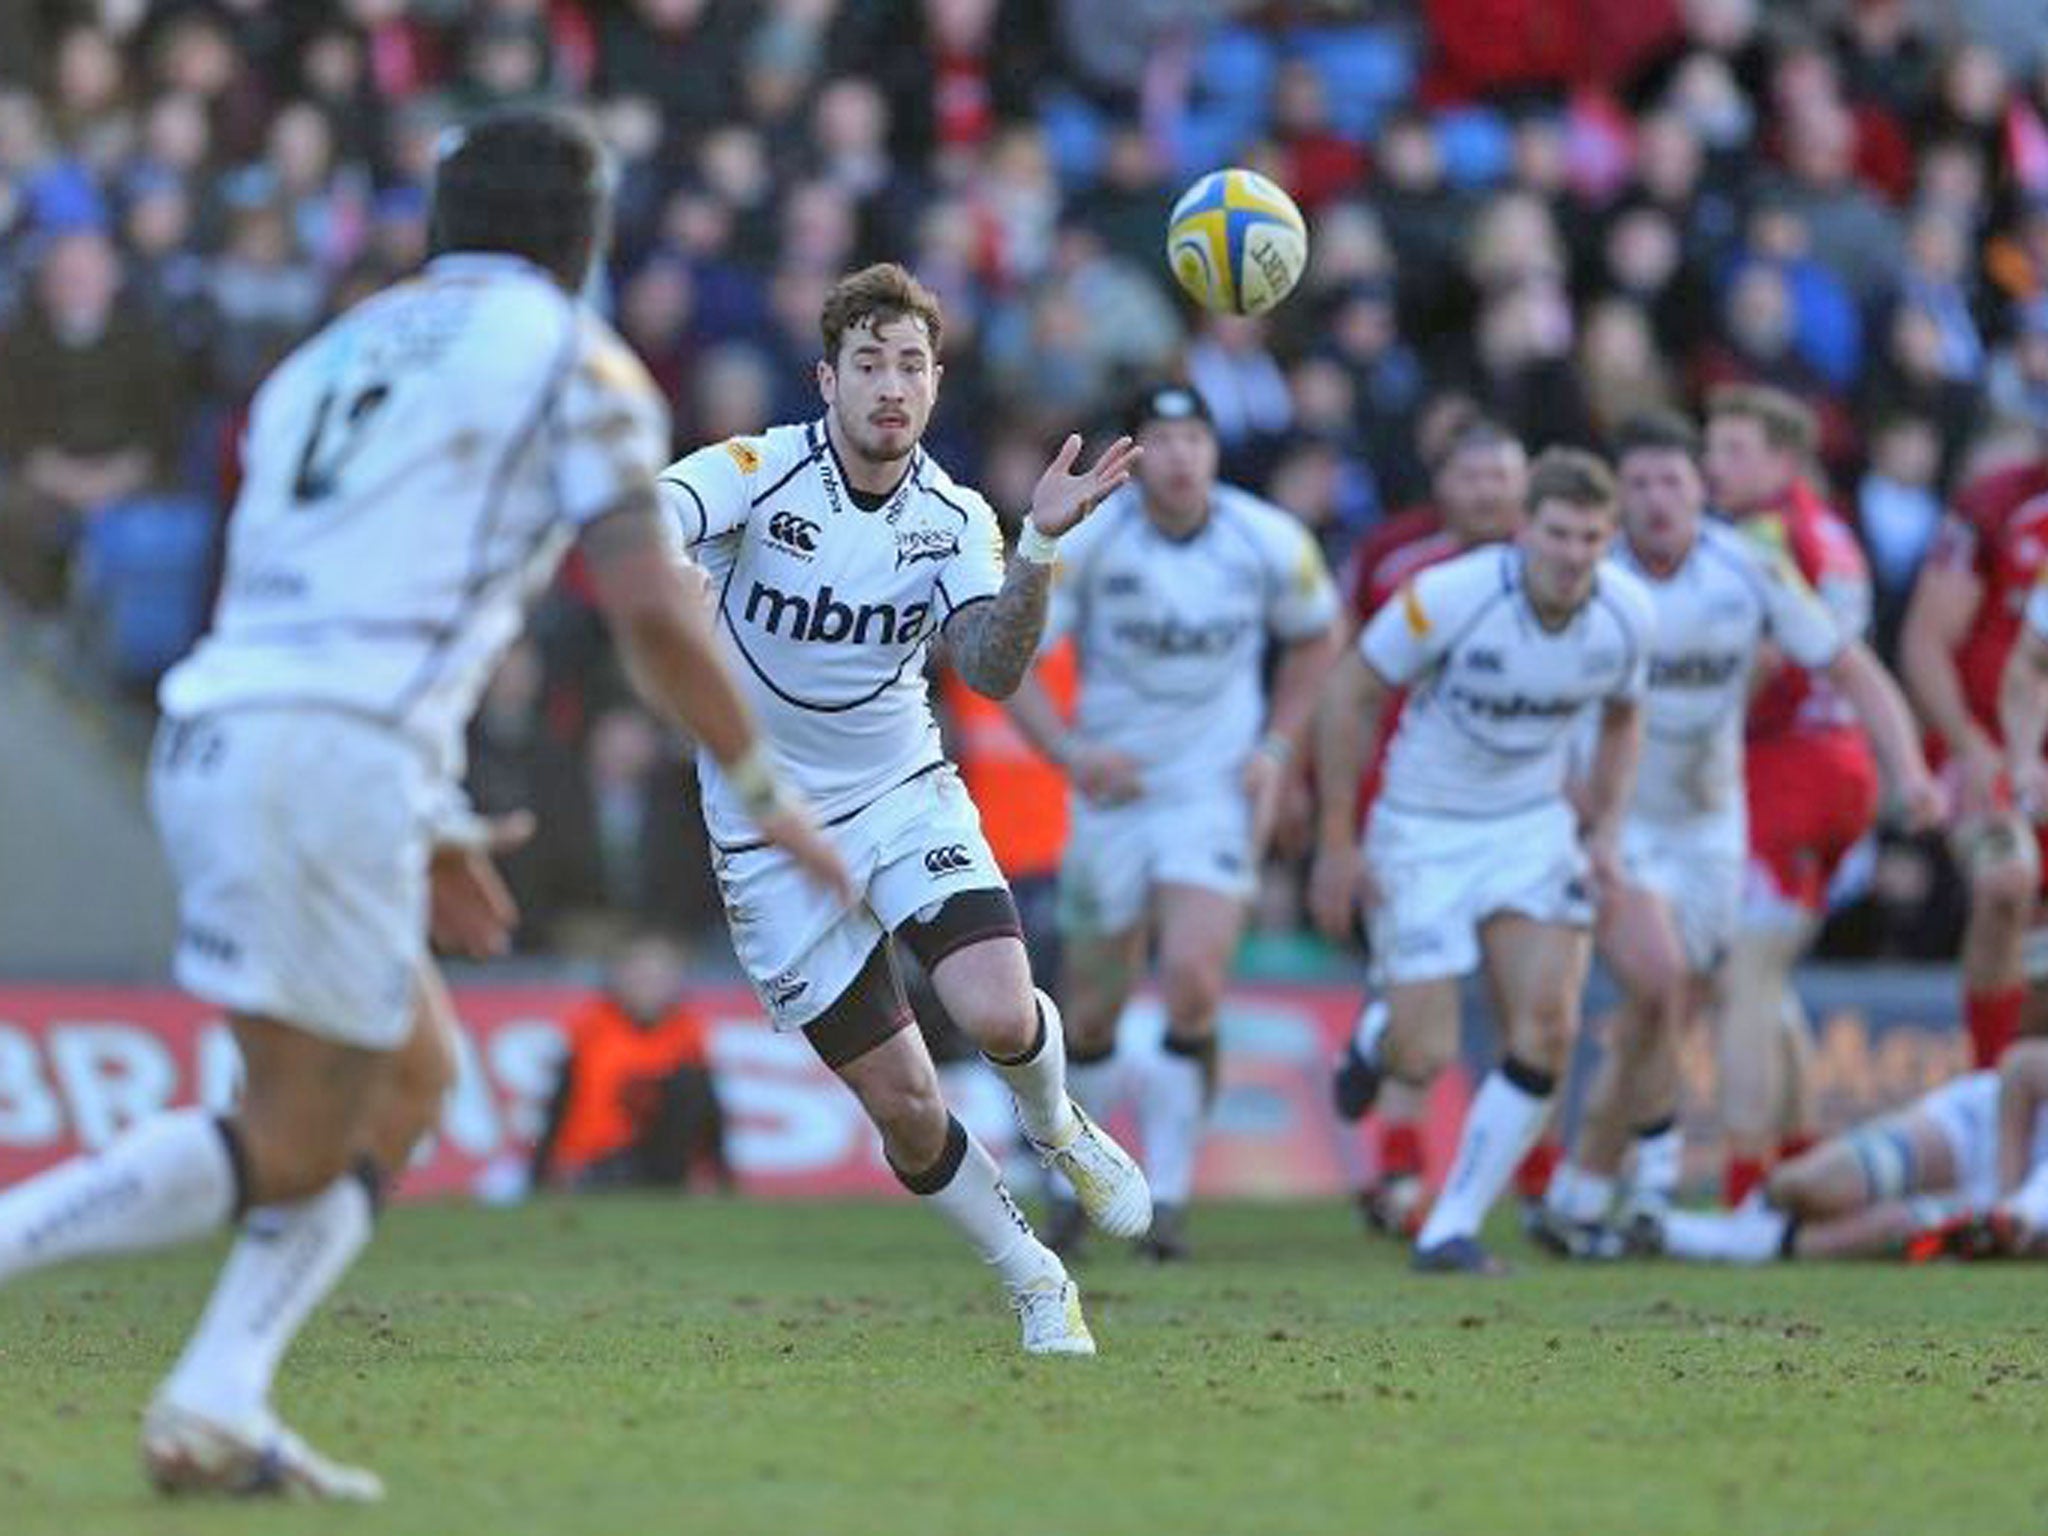 Danny Cipriani keeps the ball moving for Sale in their win over
London Welsh